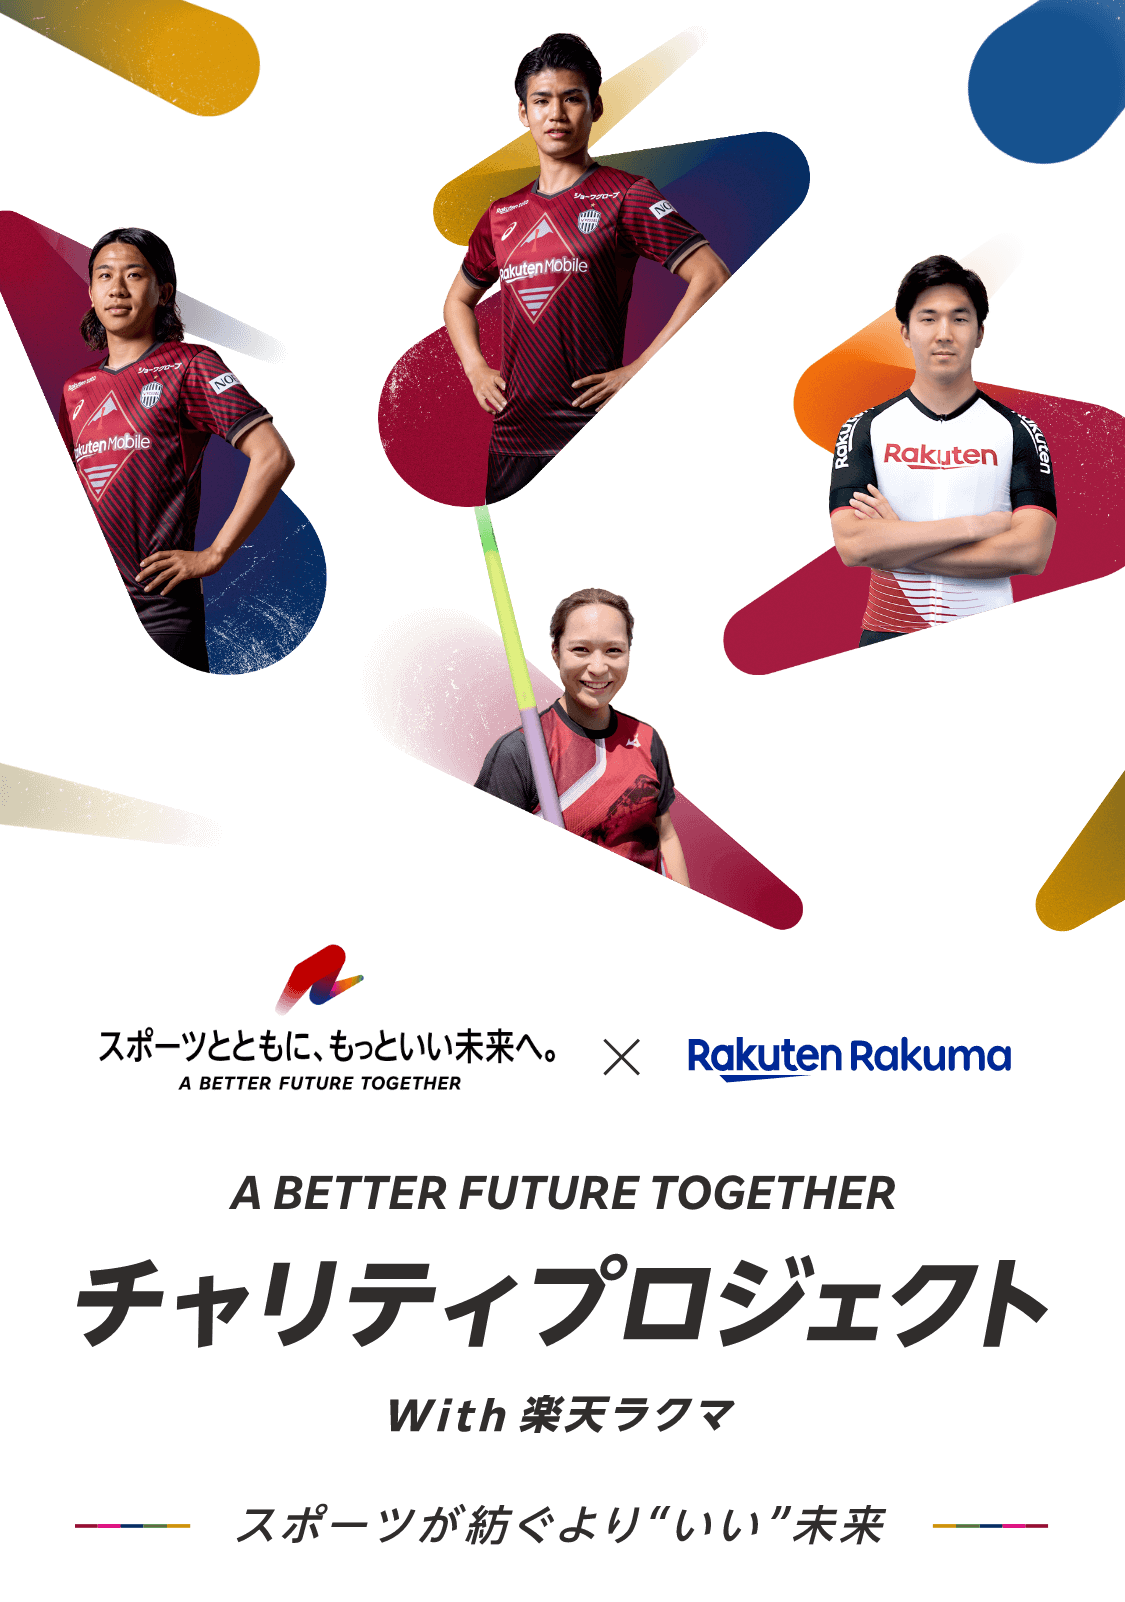 A BETTER FUTURE TOGETHER チャリティプロジェクト with 楽天ラクマ スポーツが紡ぐよりいい未来